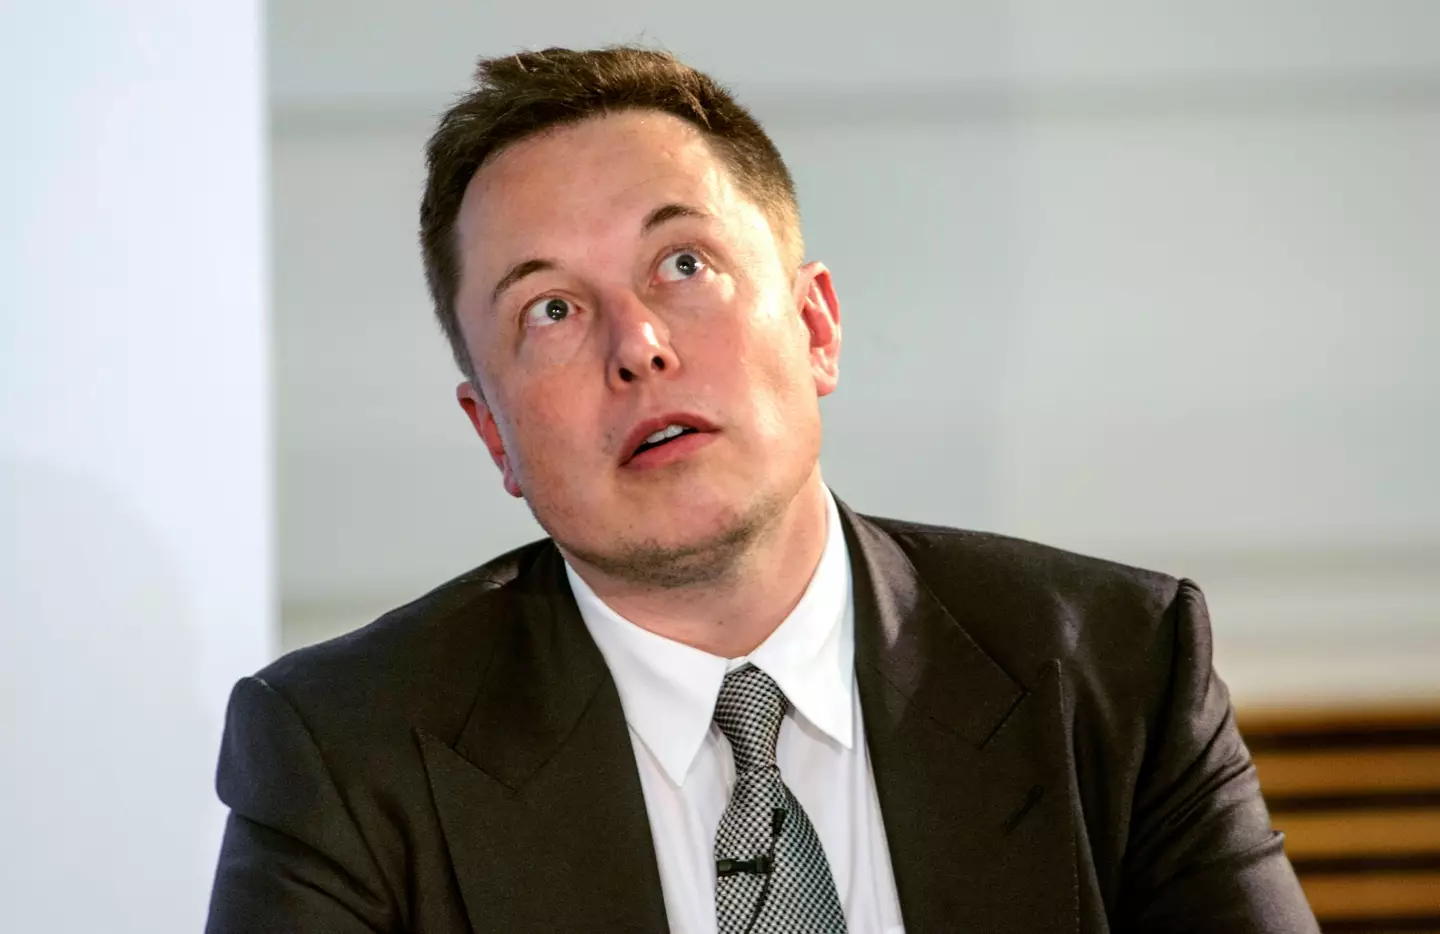 Elon Musk has been a vocal supporter of cryptocurrency.